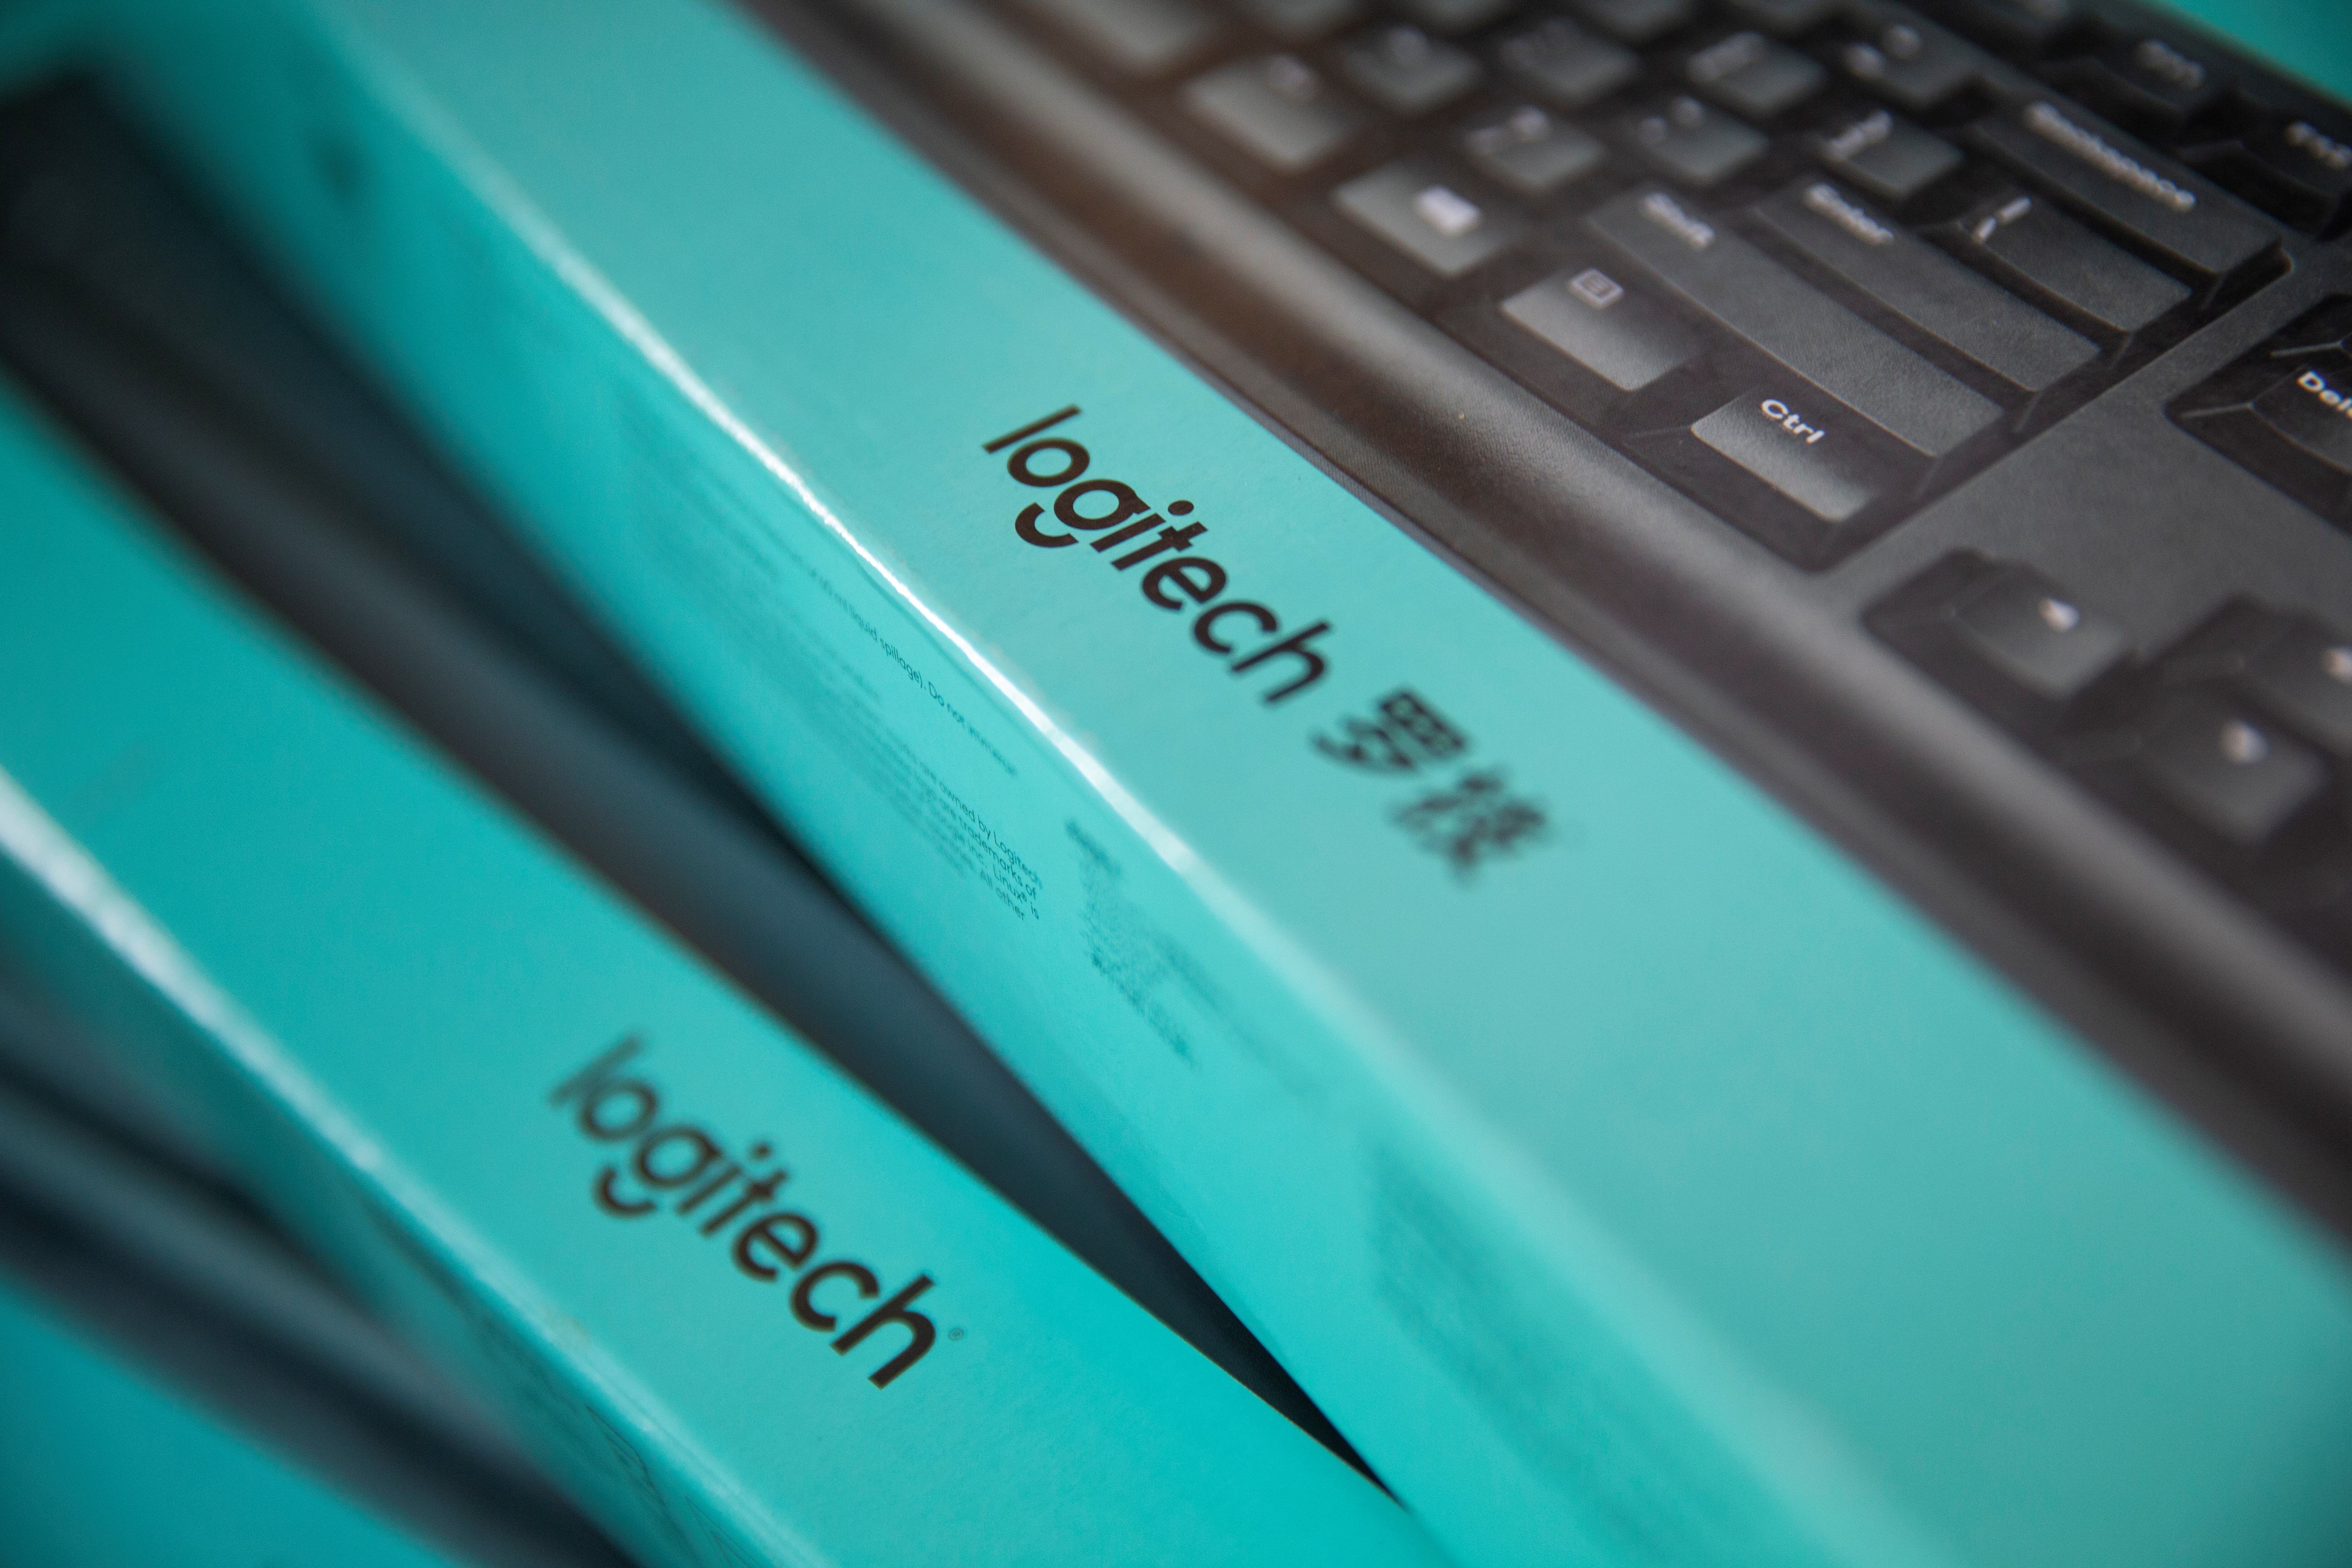 Logitech keyboards are seen in the computer shop in Zenica, Bosnia and Herzegovina October 20, 2020. REUTERS/Dado Ruvic